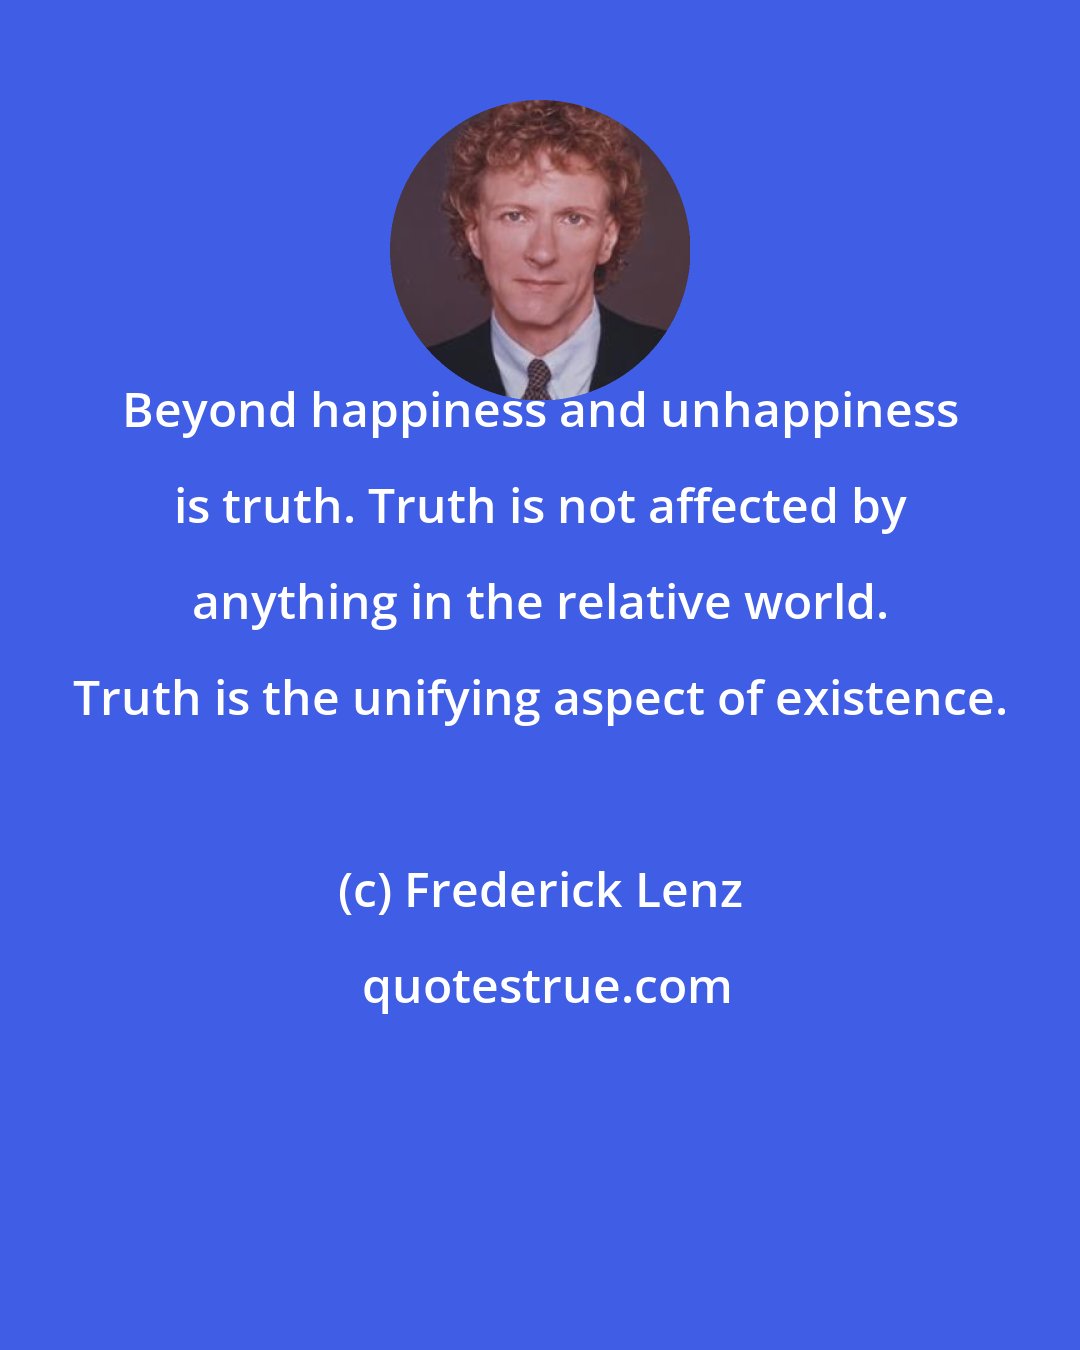 Frederick Lenz: Beyond happiness and unhappiness is truth. Truth is not affected by anything in the relative world. Truth is the unifying aspect of existence.